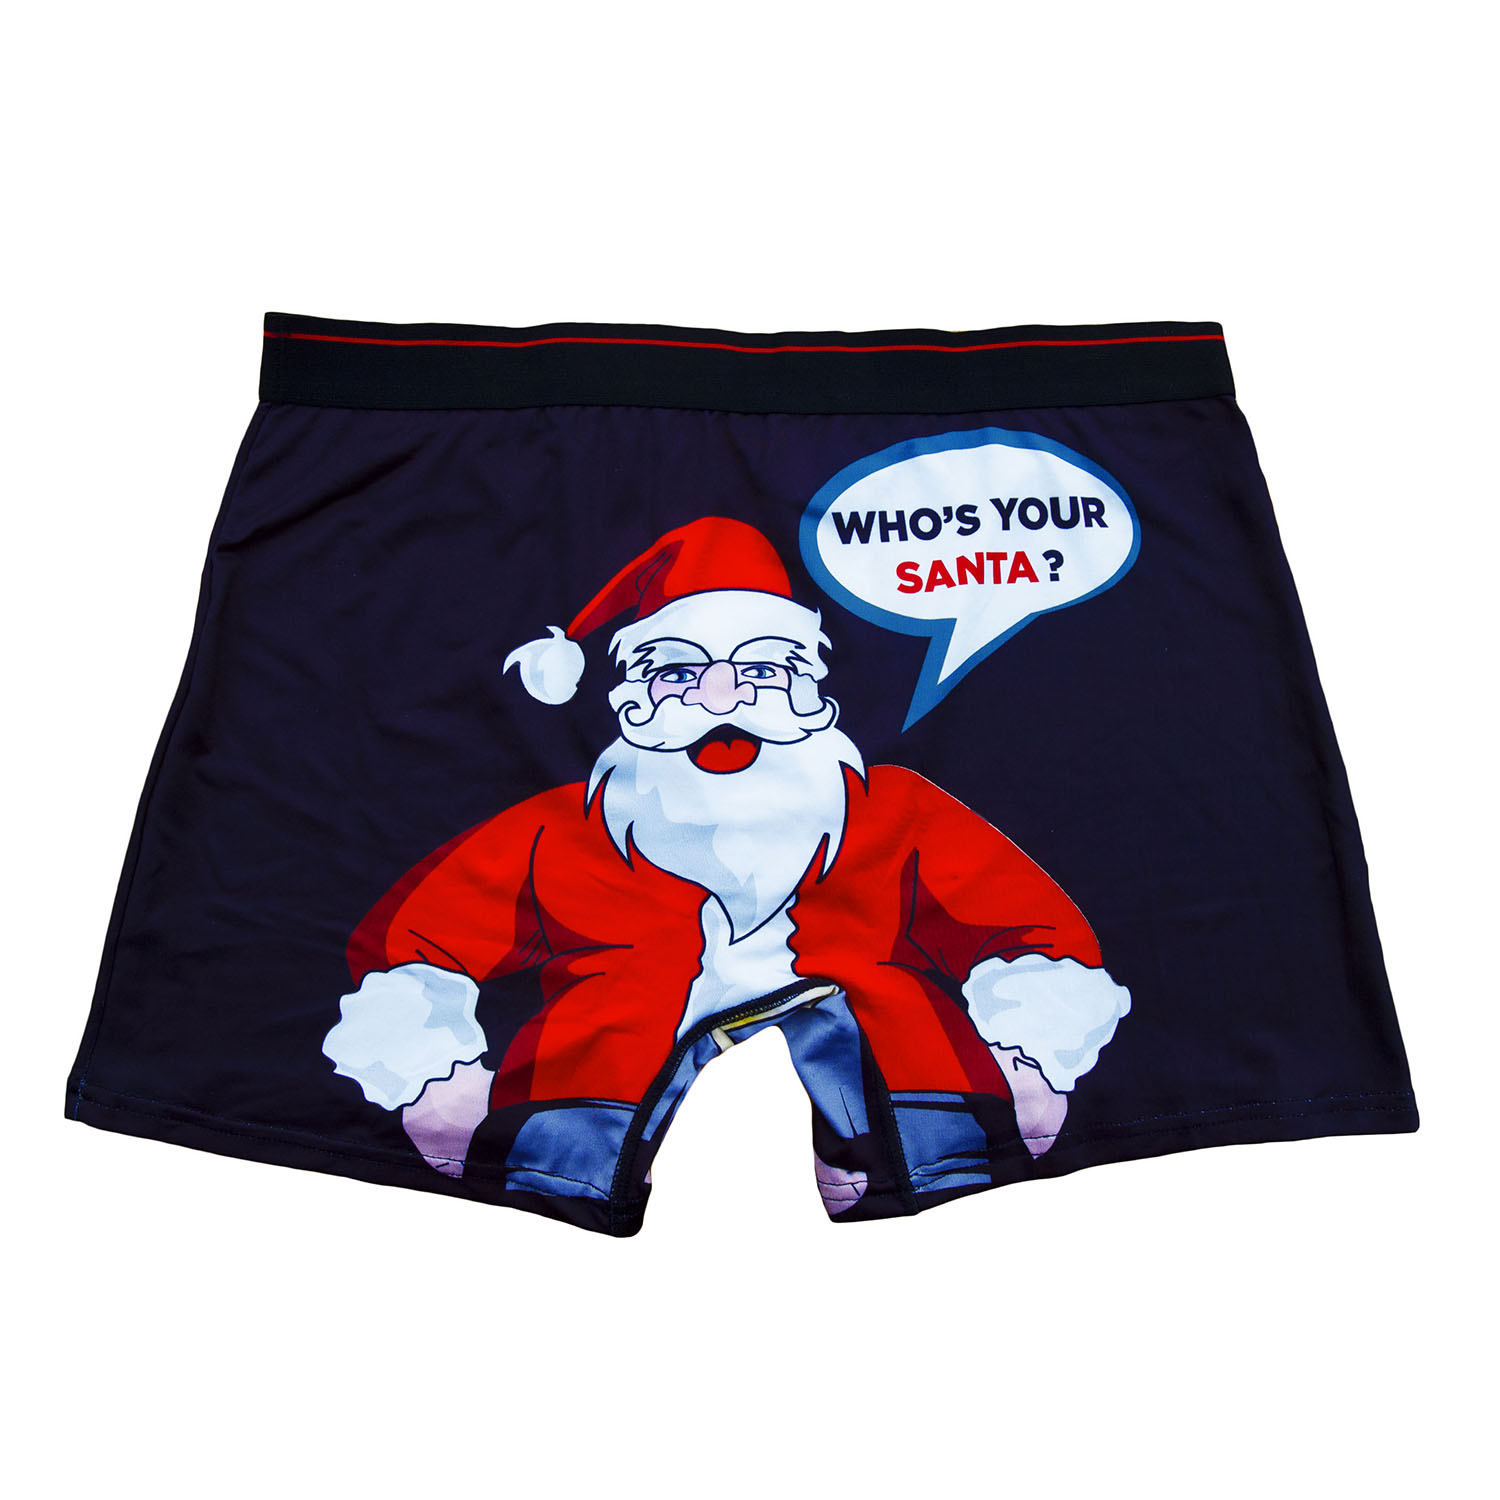 Who's your Santa